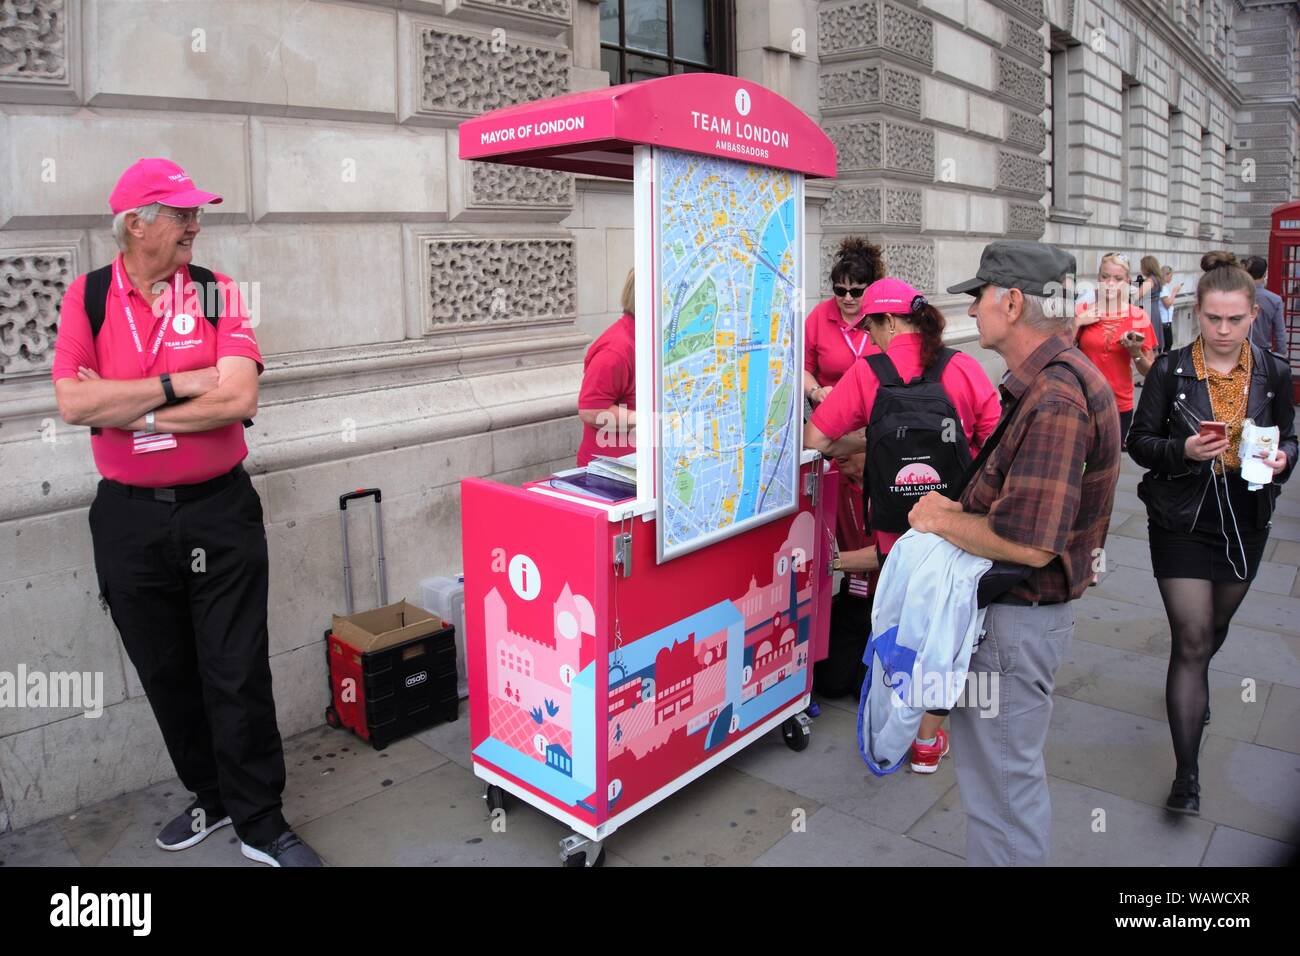 Volunteers of Team London in their pink outfit give tourist information during the summer season at Westminster, London, UK Stock Photo